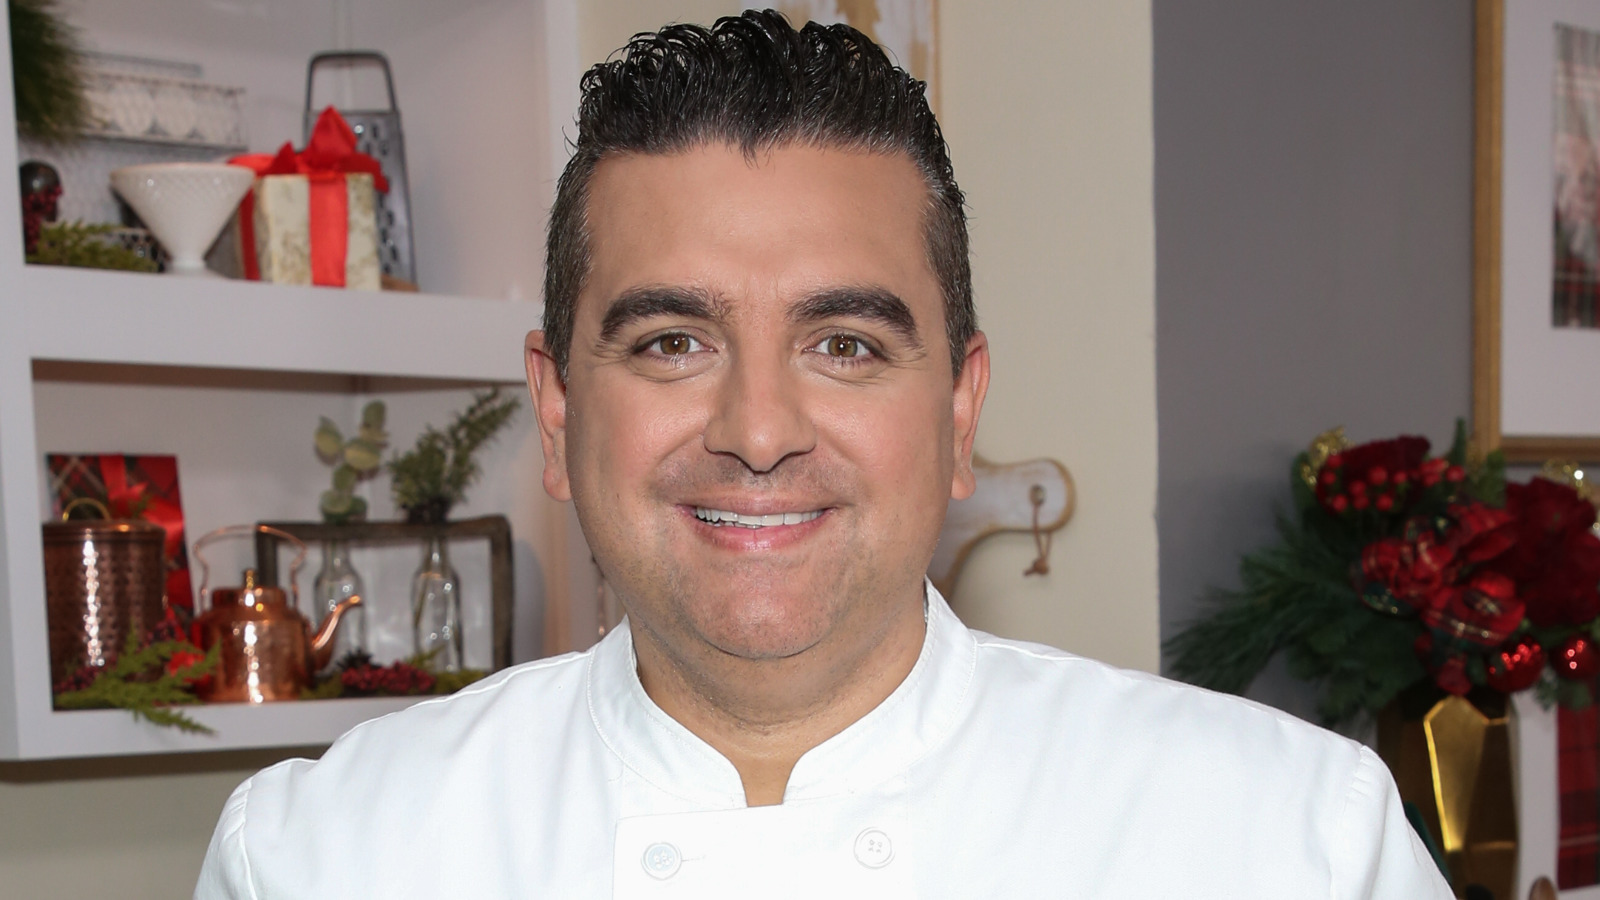 Northern tårn peeling The Truth About Buddy Valastro's Legal Battles